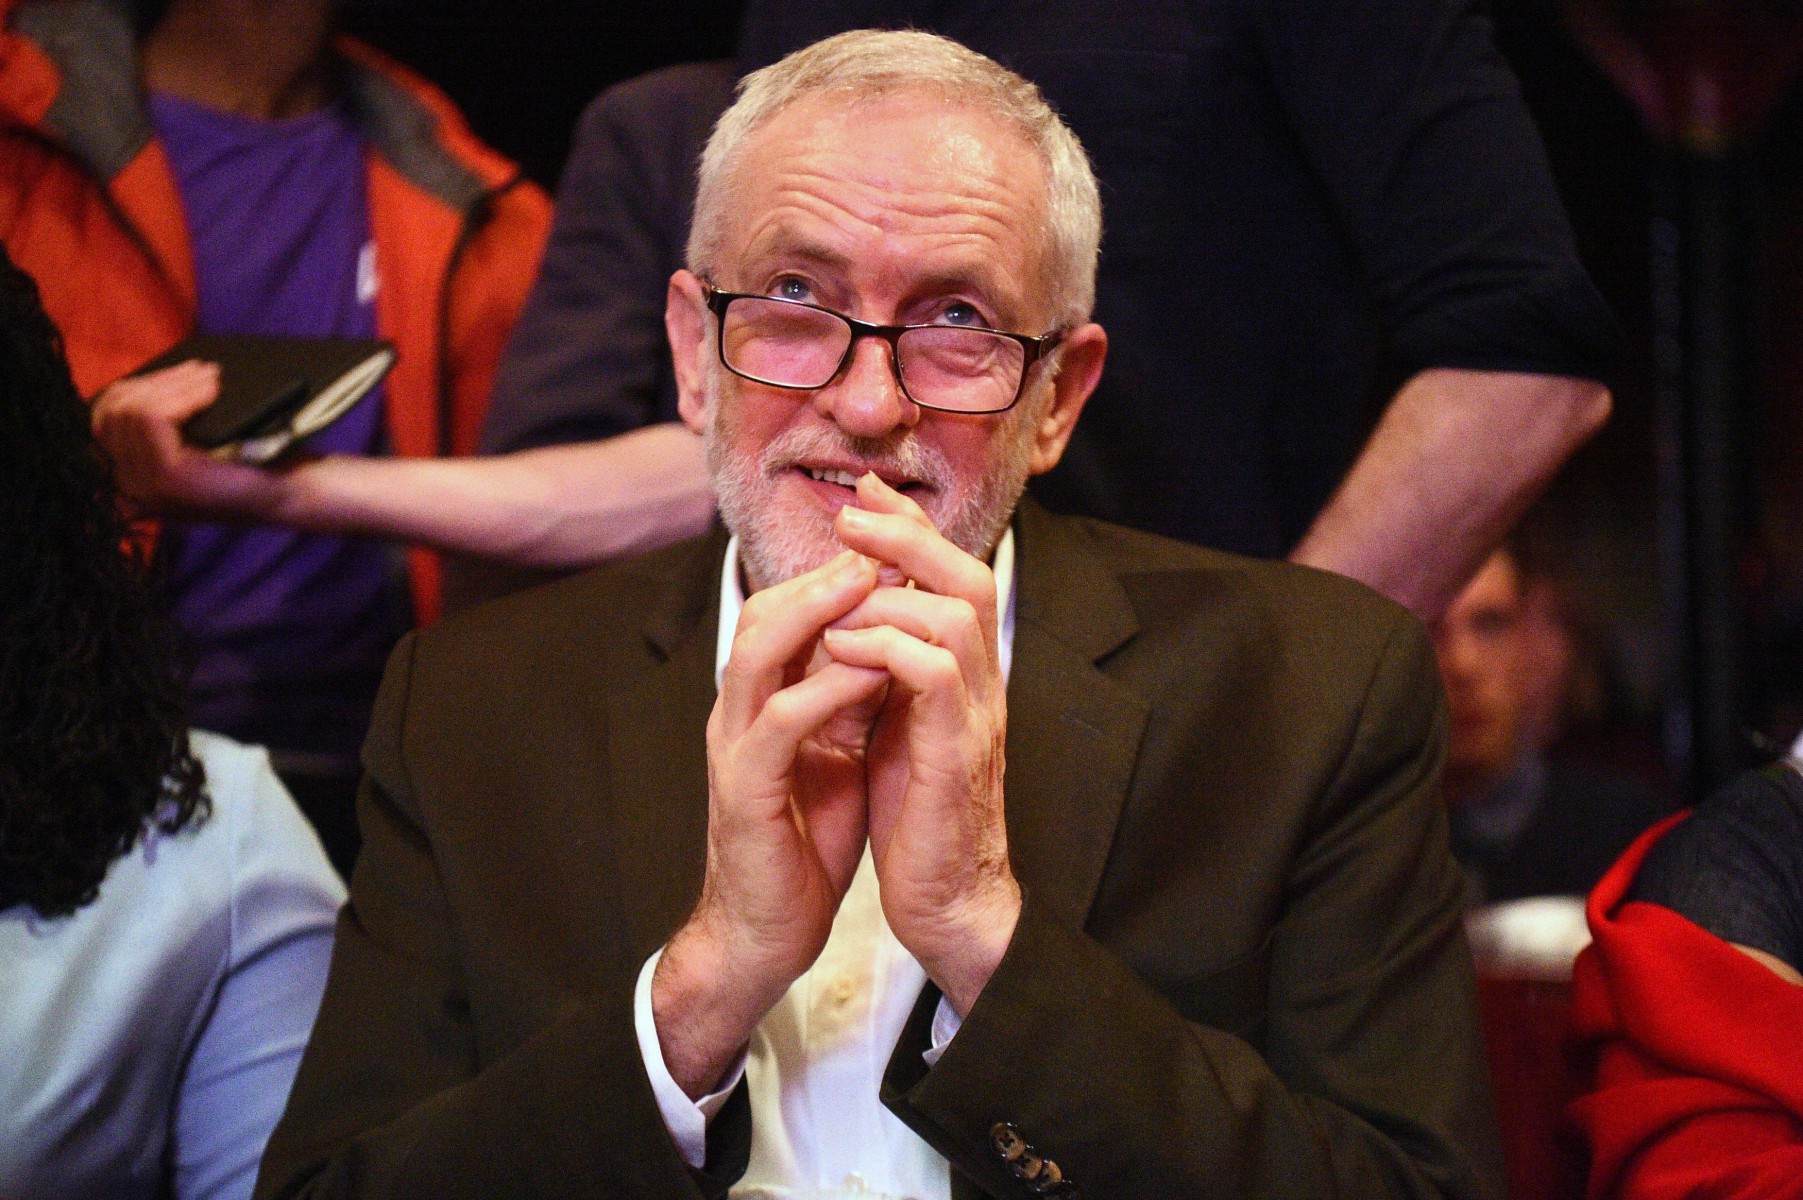 Has Jeremy Corbyn shown another side to him? 